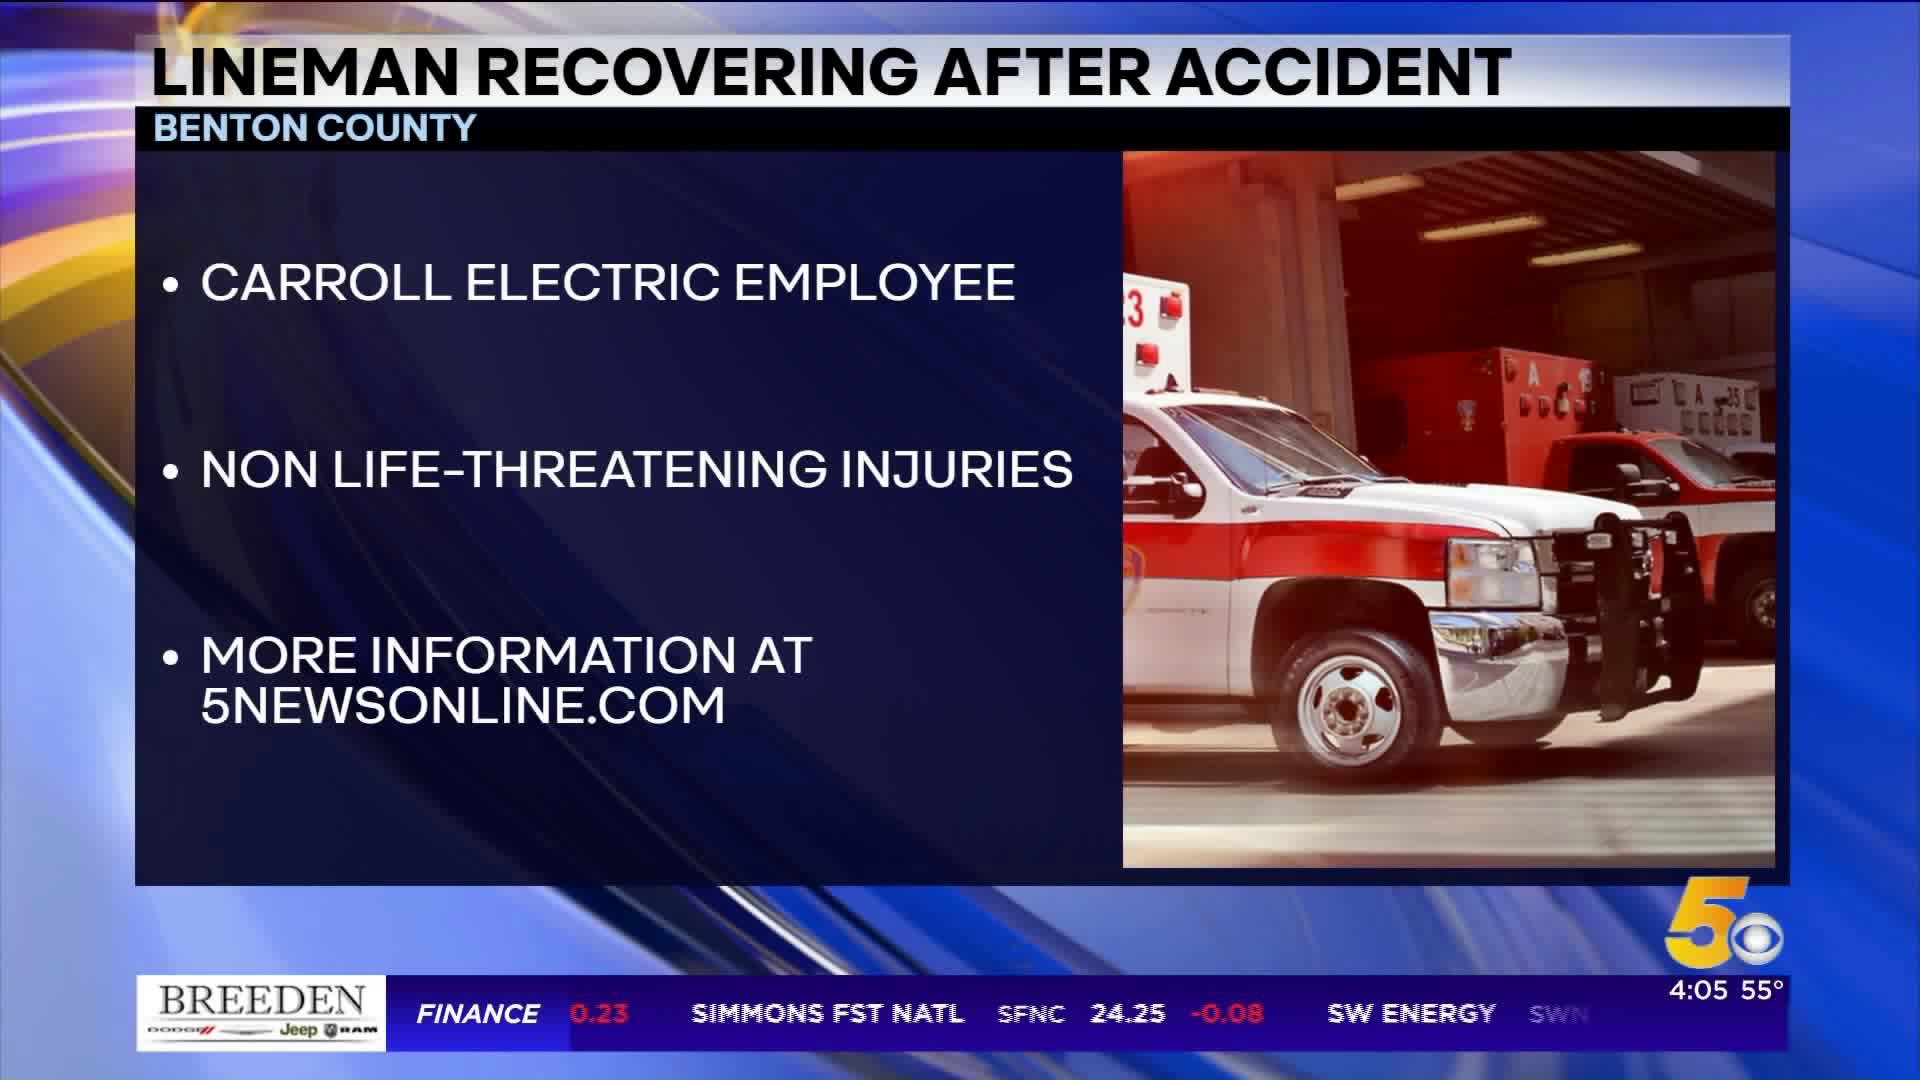 Carroll Electric Lineman Recovering After Accident In Benton County 